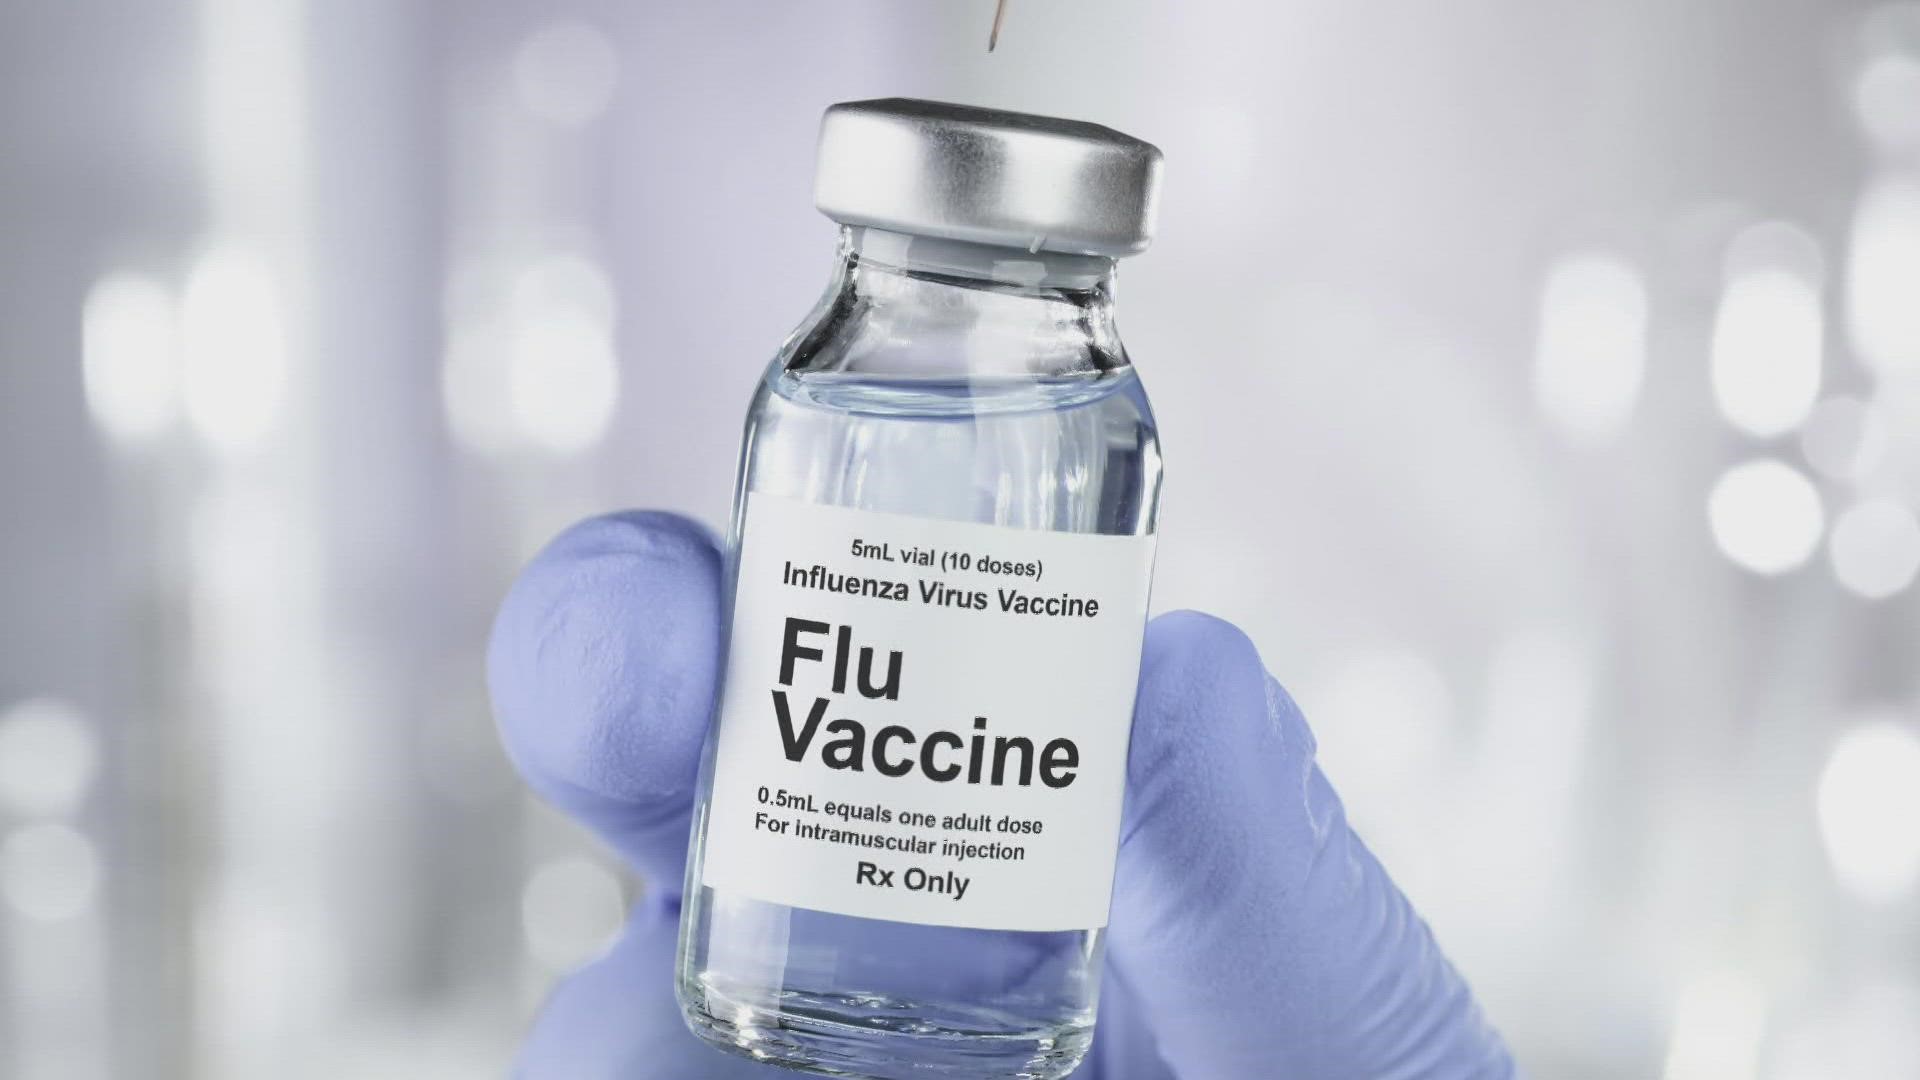 There are several different types of influenza virus that circulate every year. The flu shot is meant to protect against strains more likely to cause epidemics.